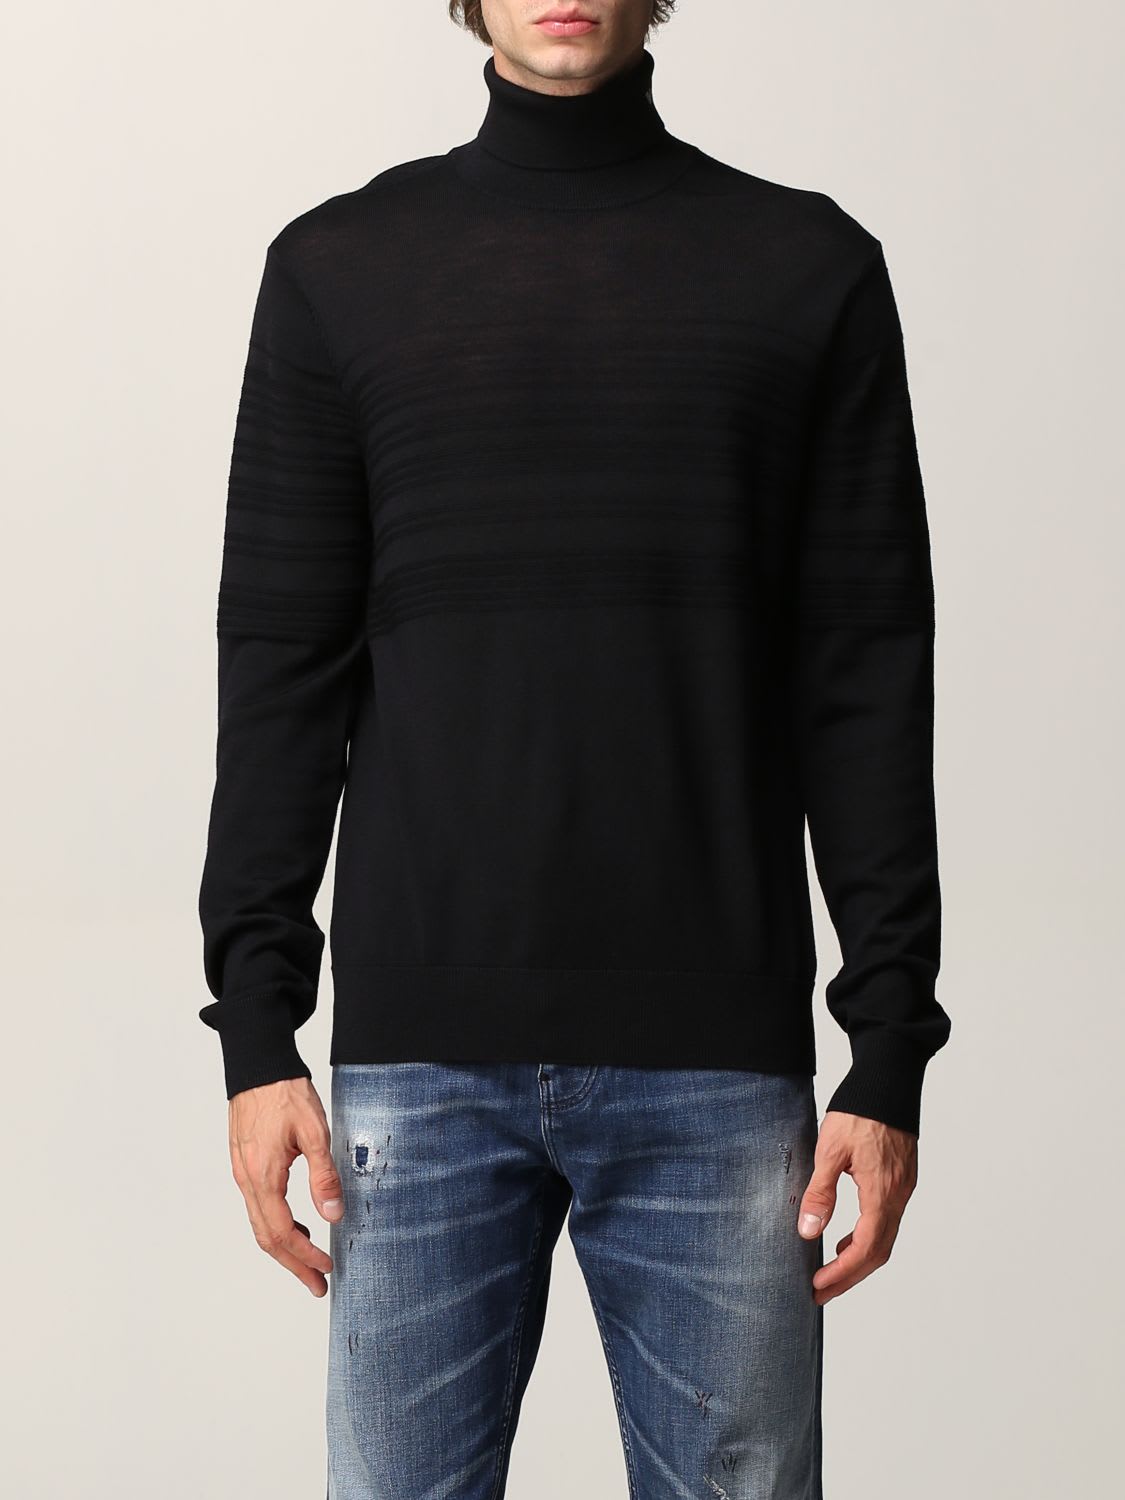 Emporio Armani Sweater Emporio Armani Sweater In Virgin Wool With Embroidered Logo And Inlays